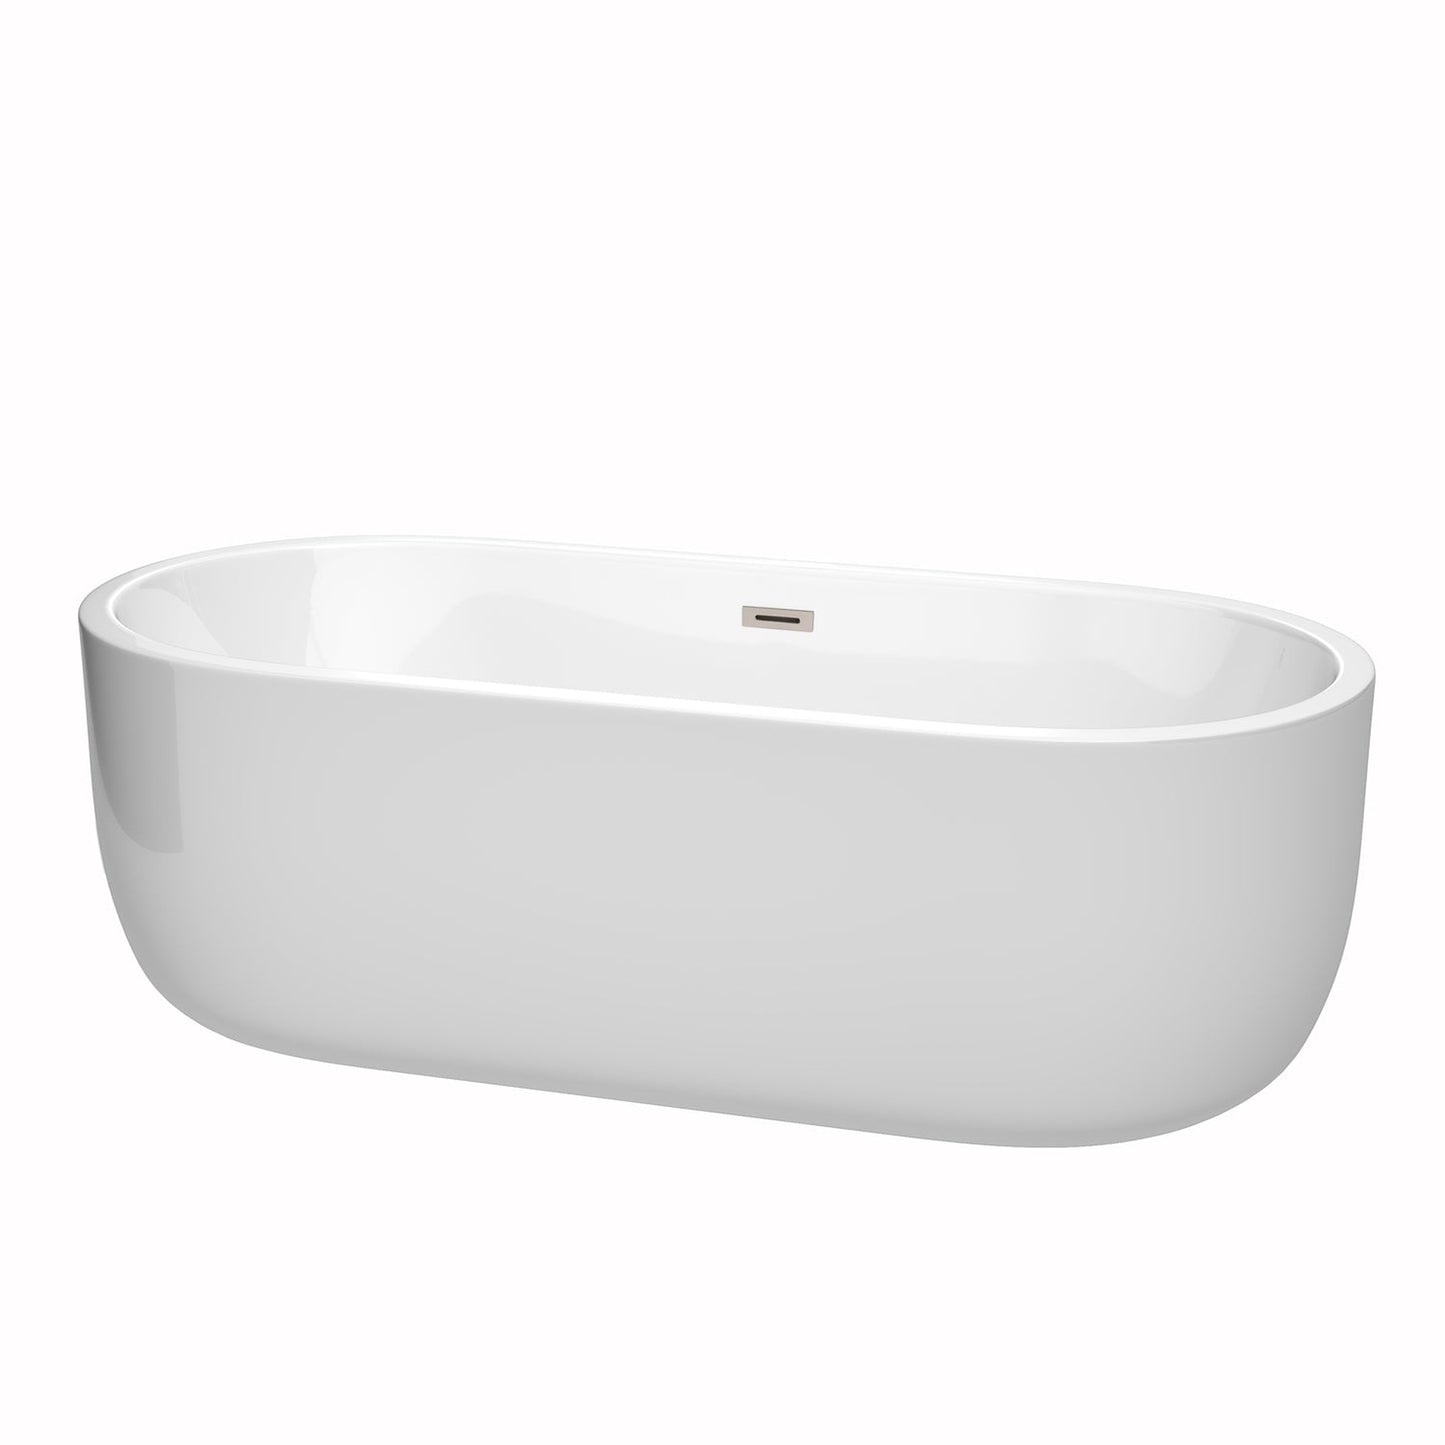 Wyndham Collection Juliette 71" Freestanding Bathtub in White With Brushed Nickel Drain and Overflow Trim